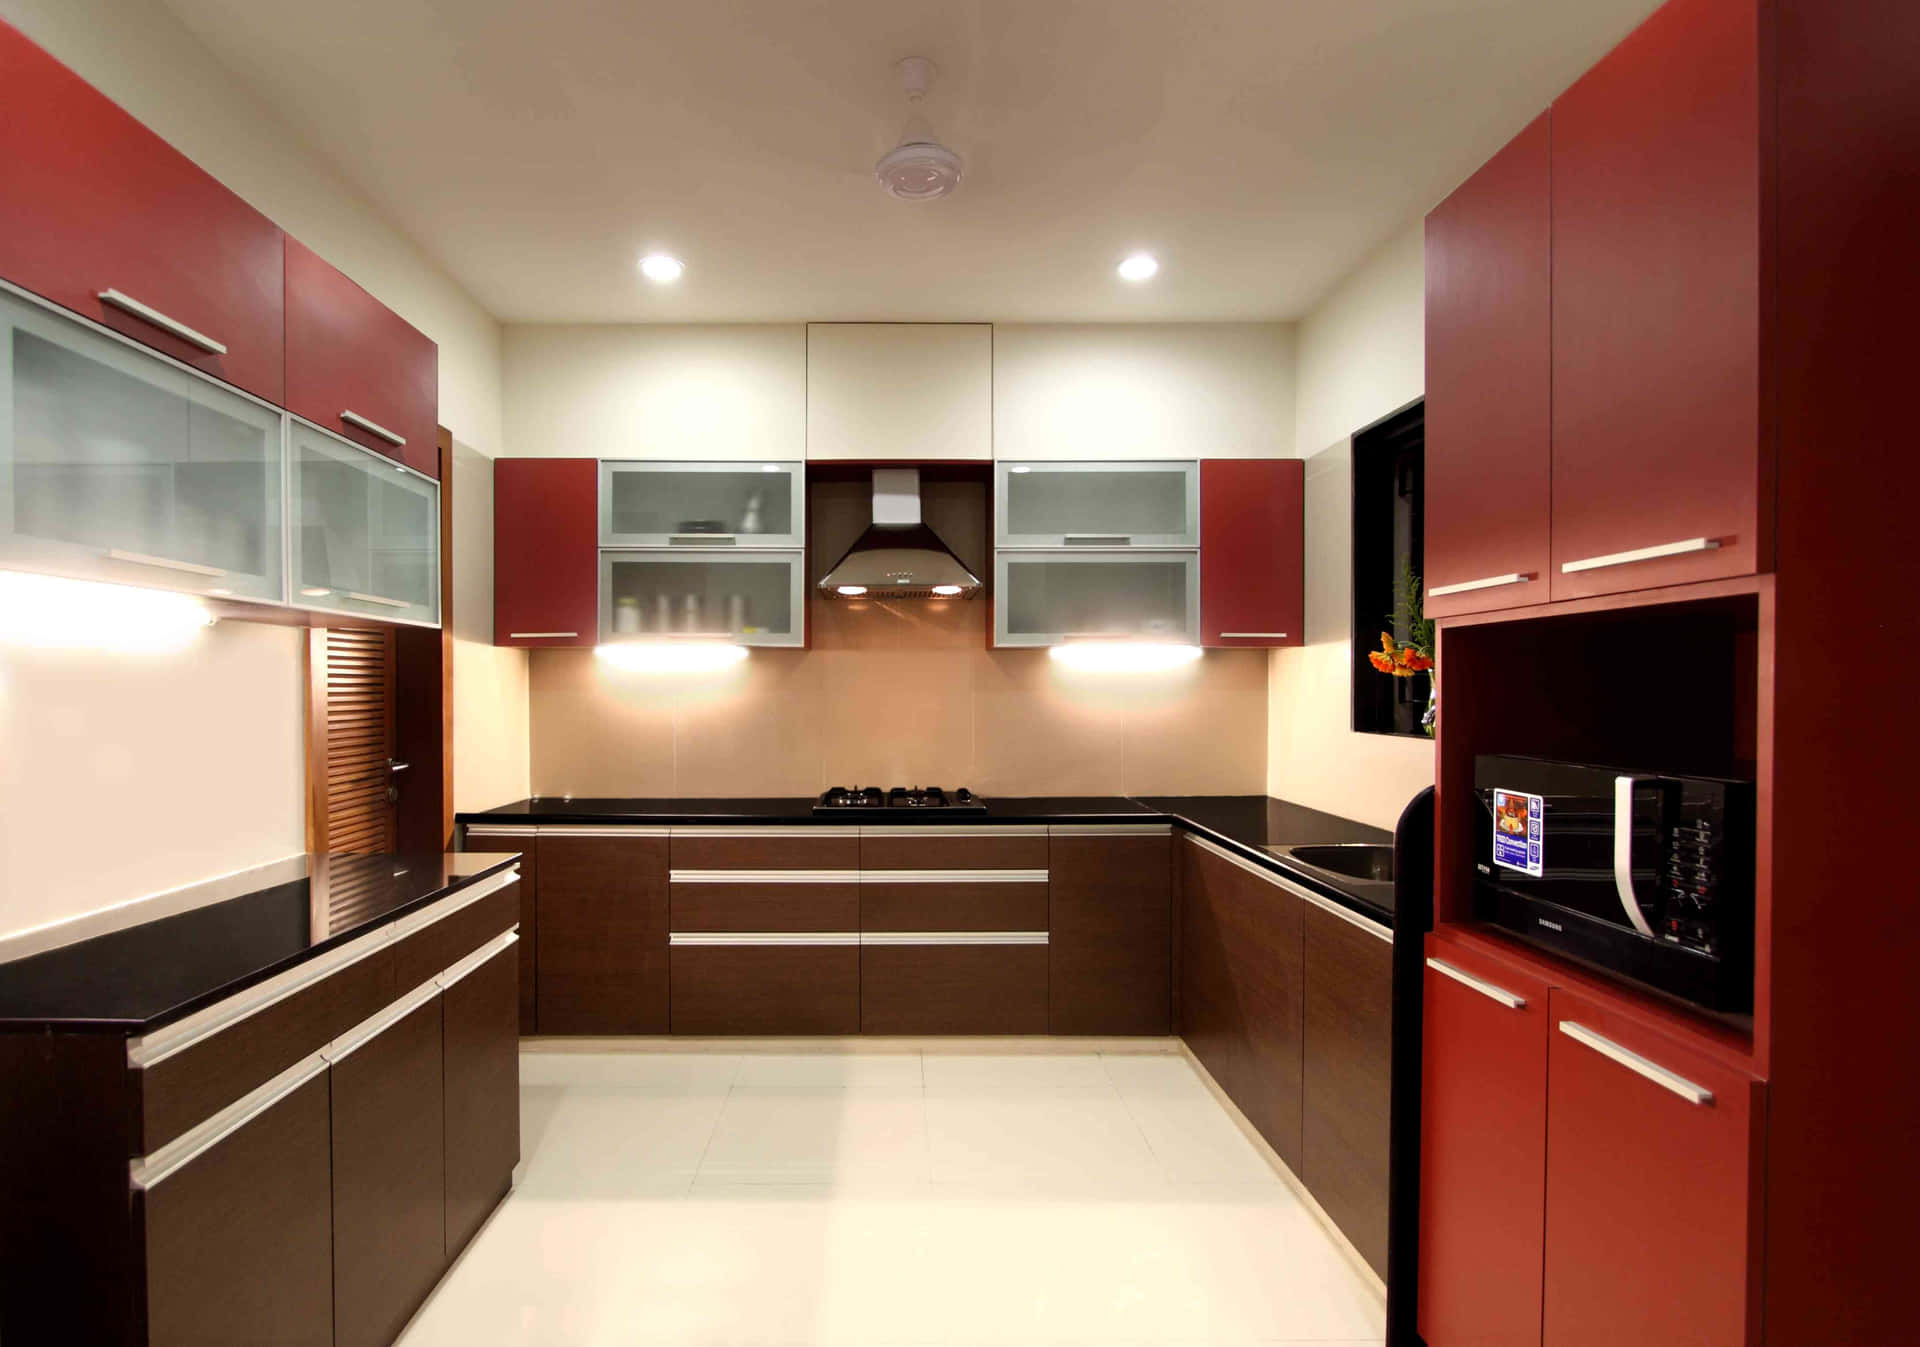 A Kitchen With Red And White Cabinets